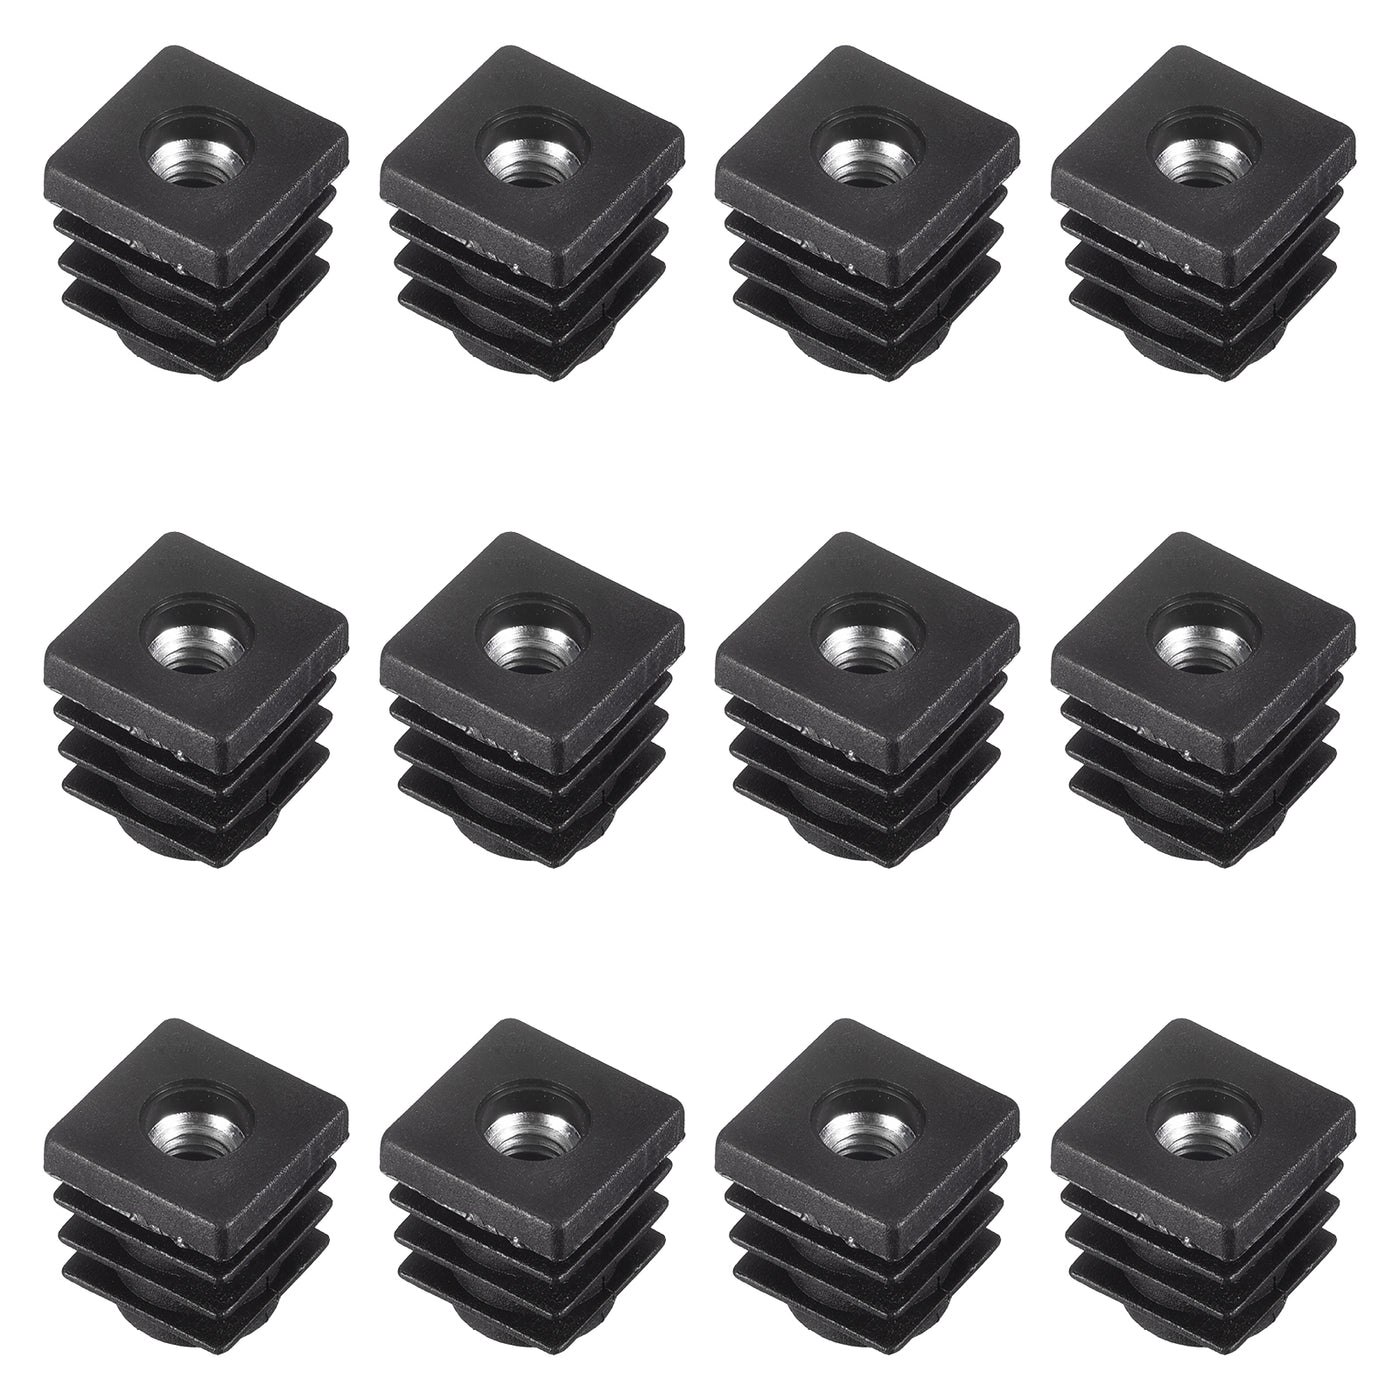 uxcell Uxcell 12Pcs 0.59"x0.59" Caster Insert with Thread, Square M6 Thread for Furniture